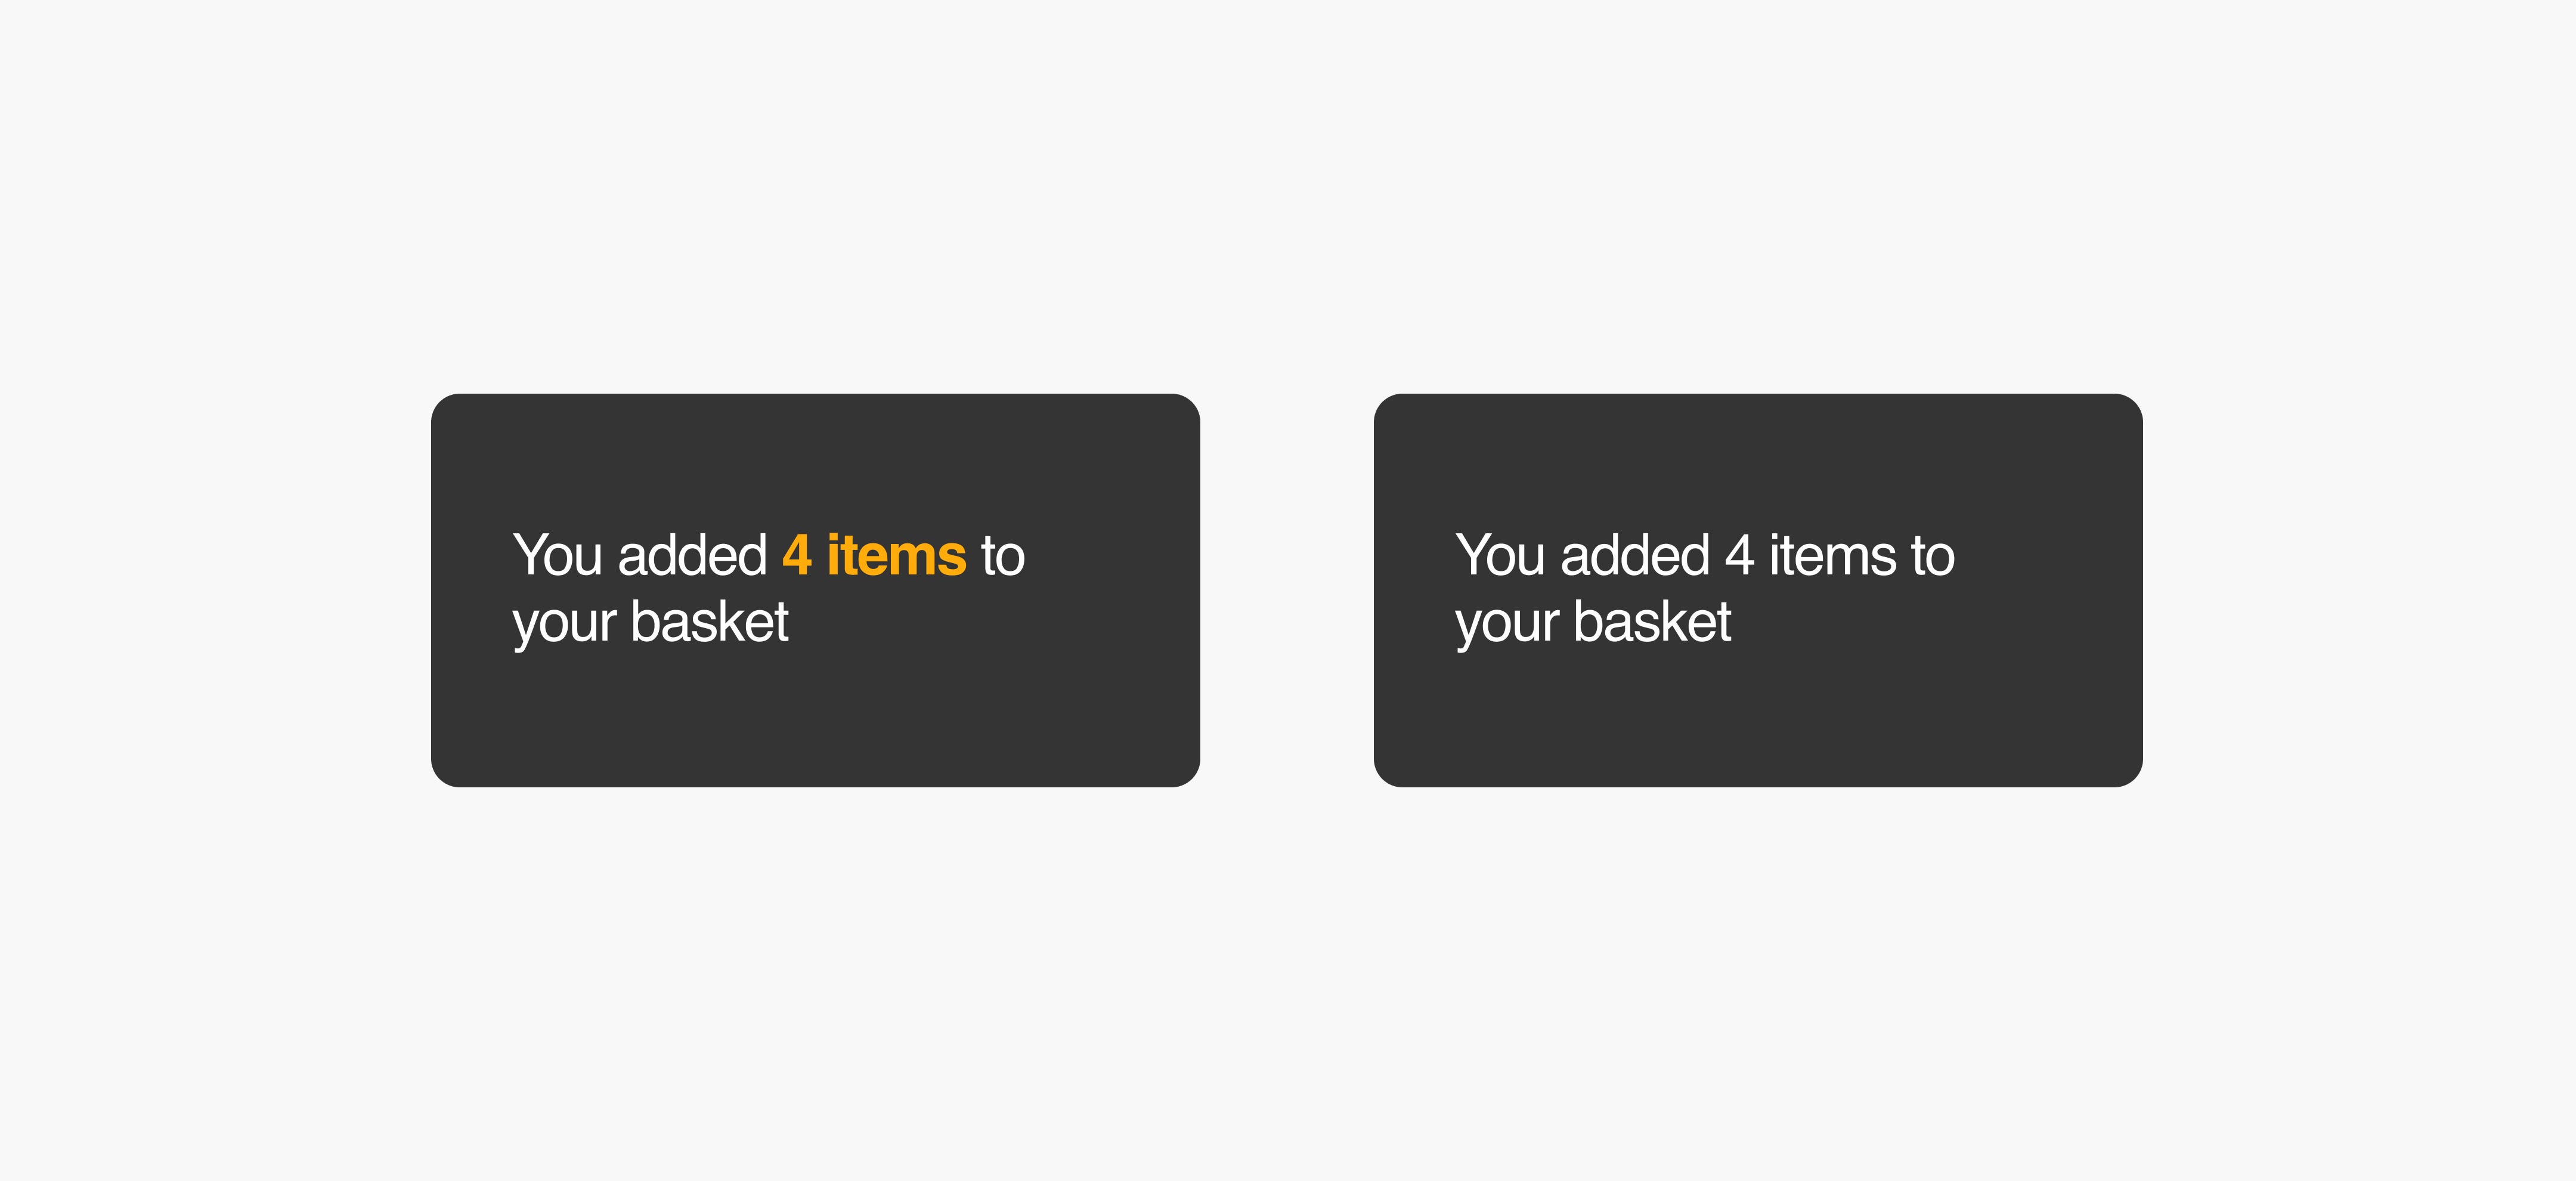 Two screens both say: You added 4 items to your basket. One screen uses bold text and color to highlight a phrase. The other uses a single typeface with no extra formatting.